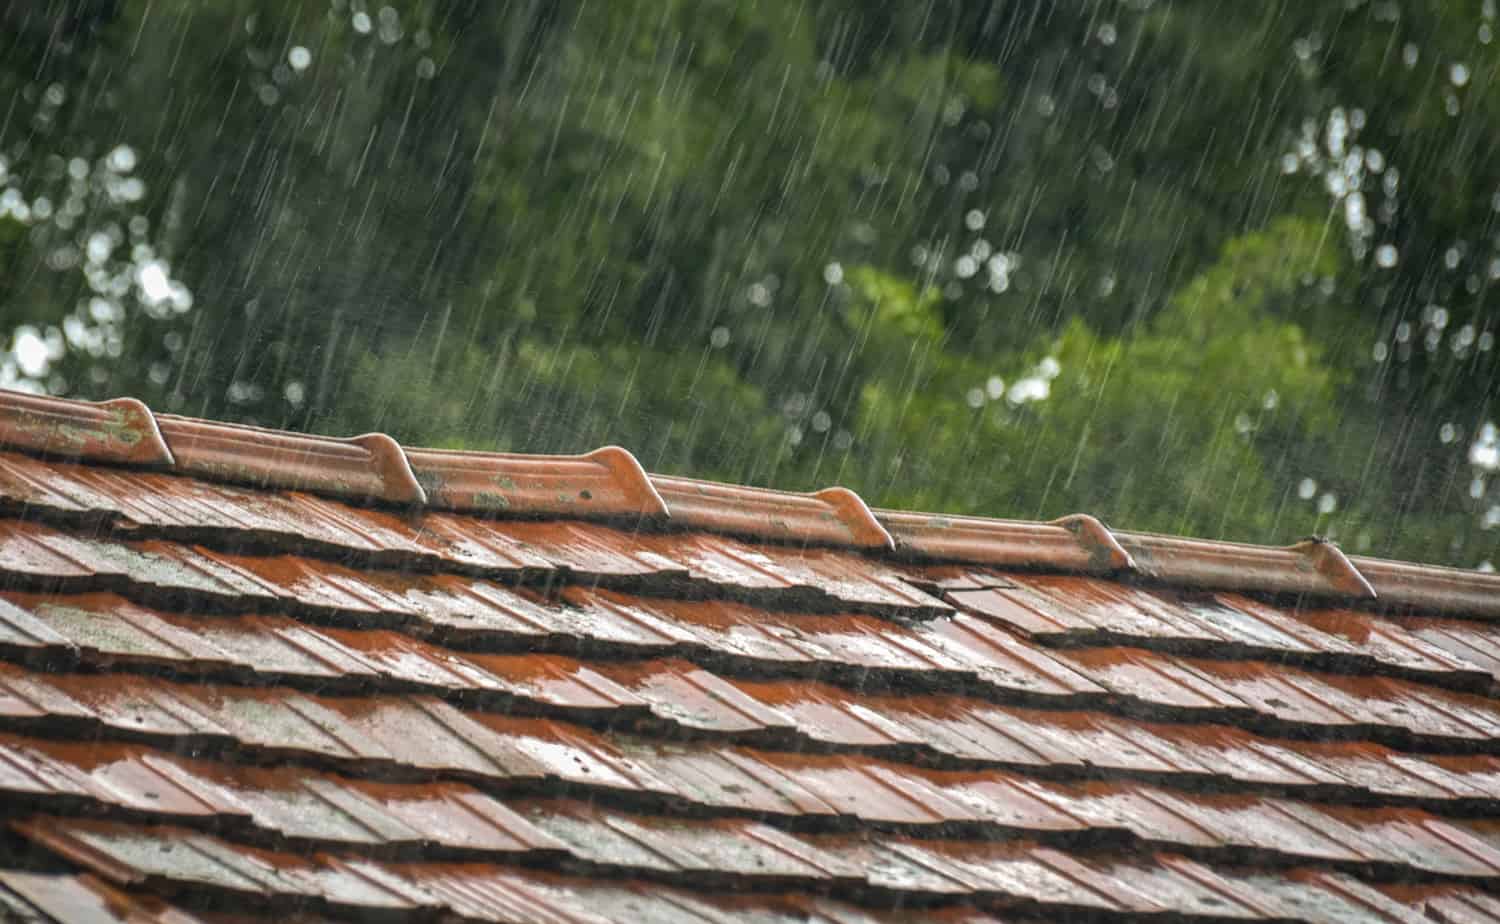 Heavy downpour over the tiled roof